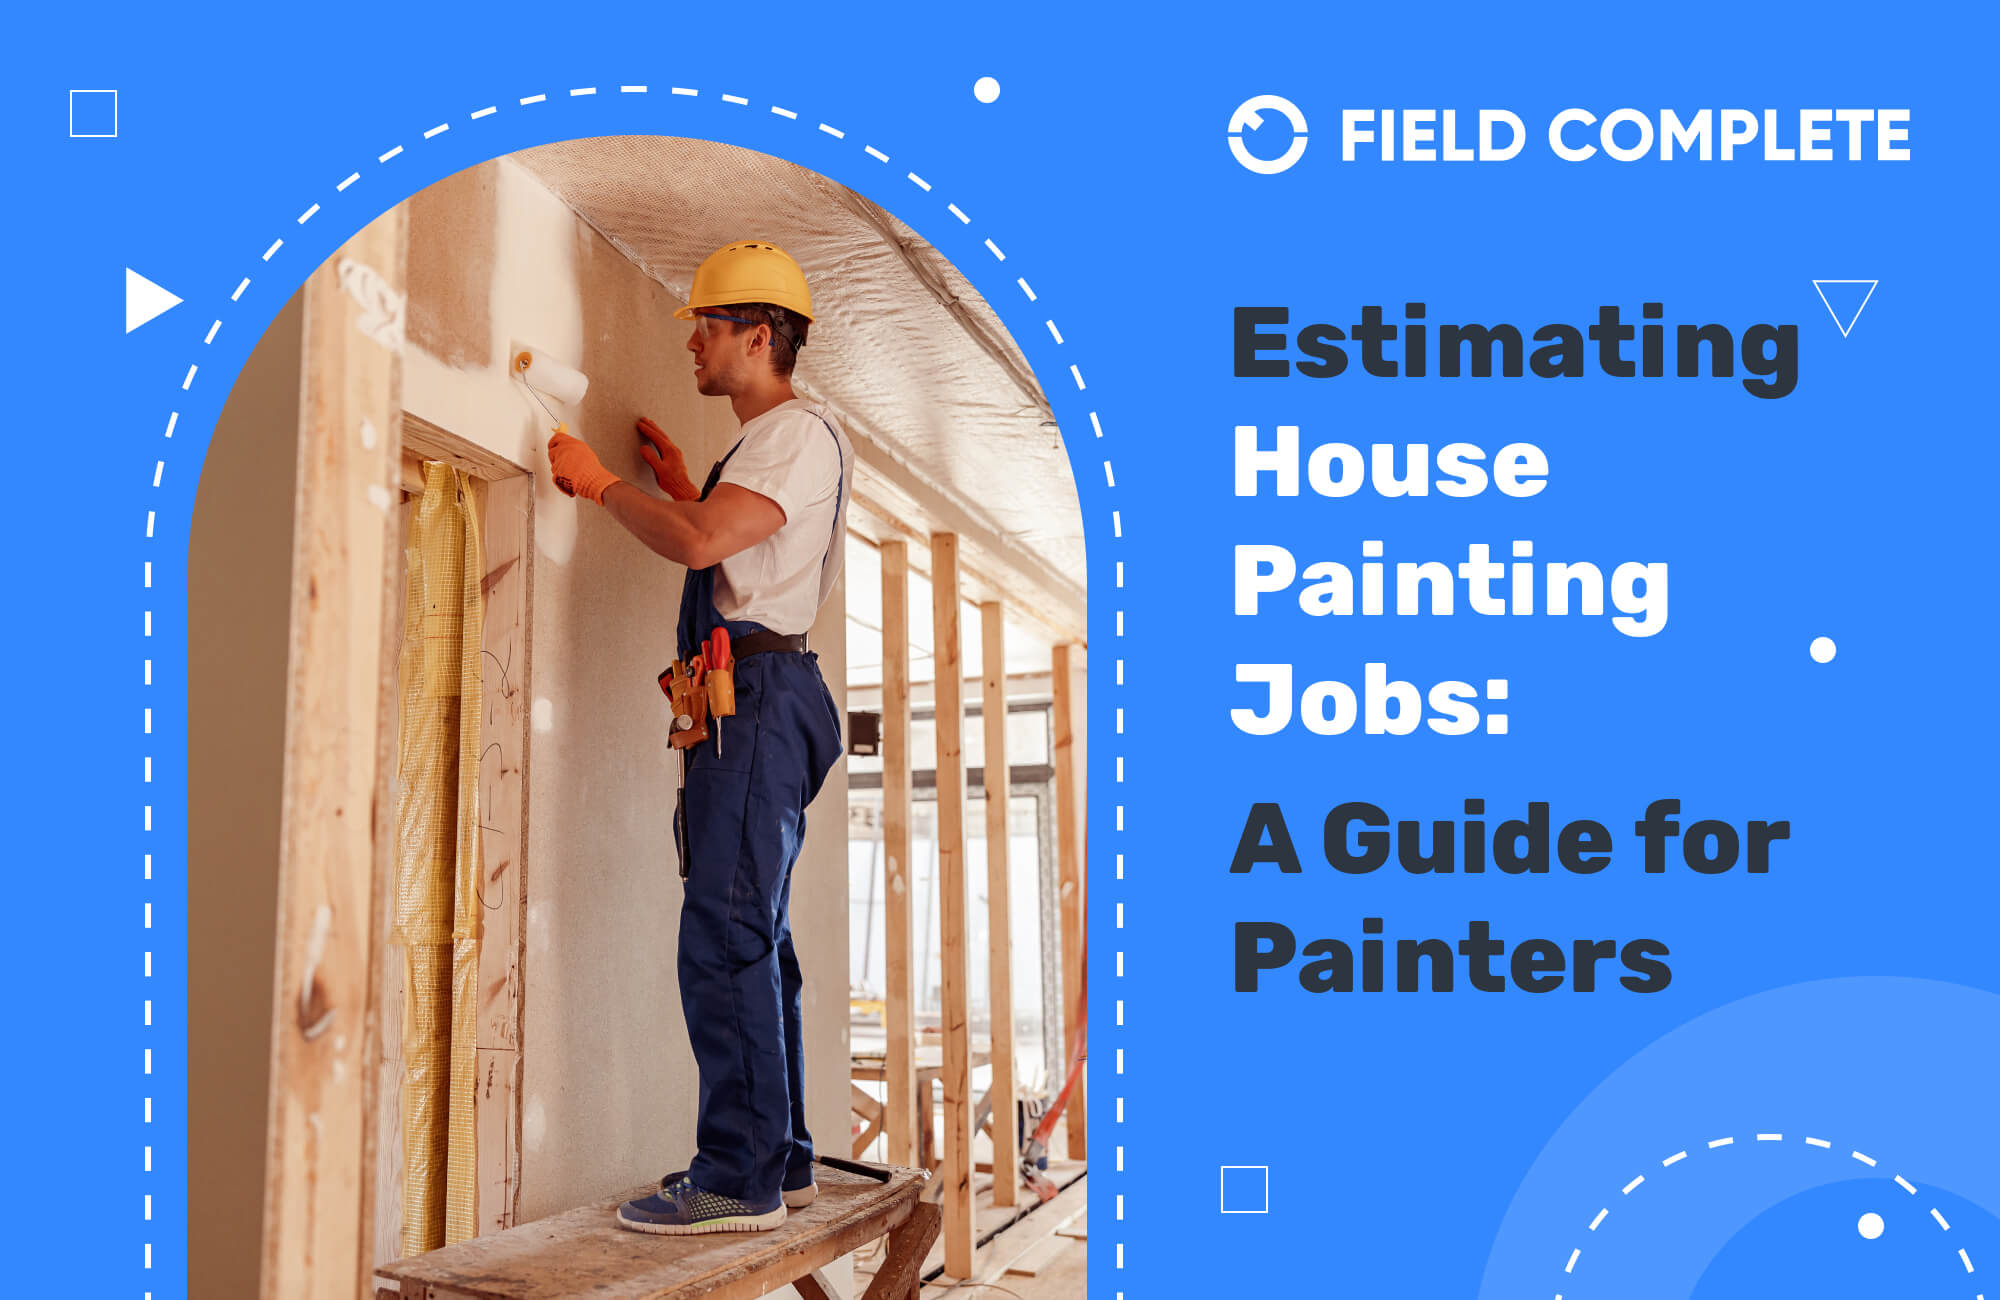 Estimating House Painting Job: A Guide for Painters